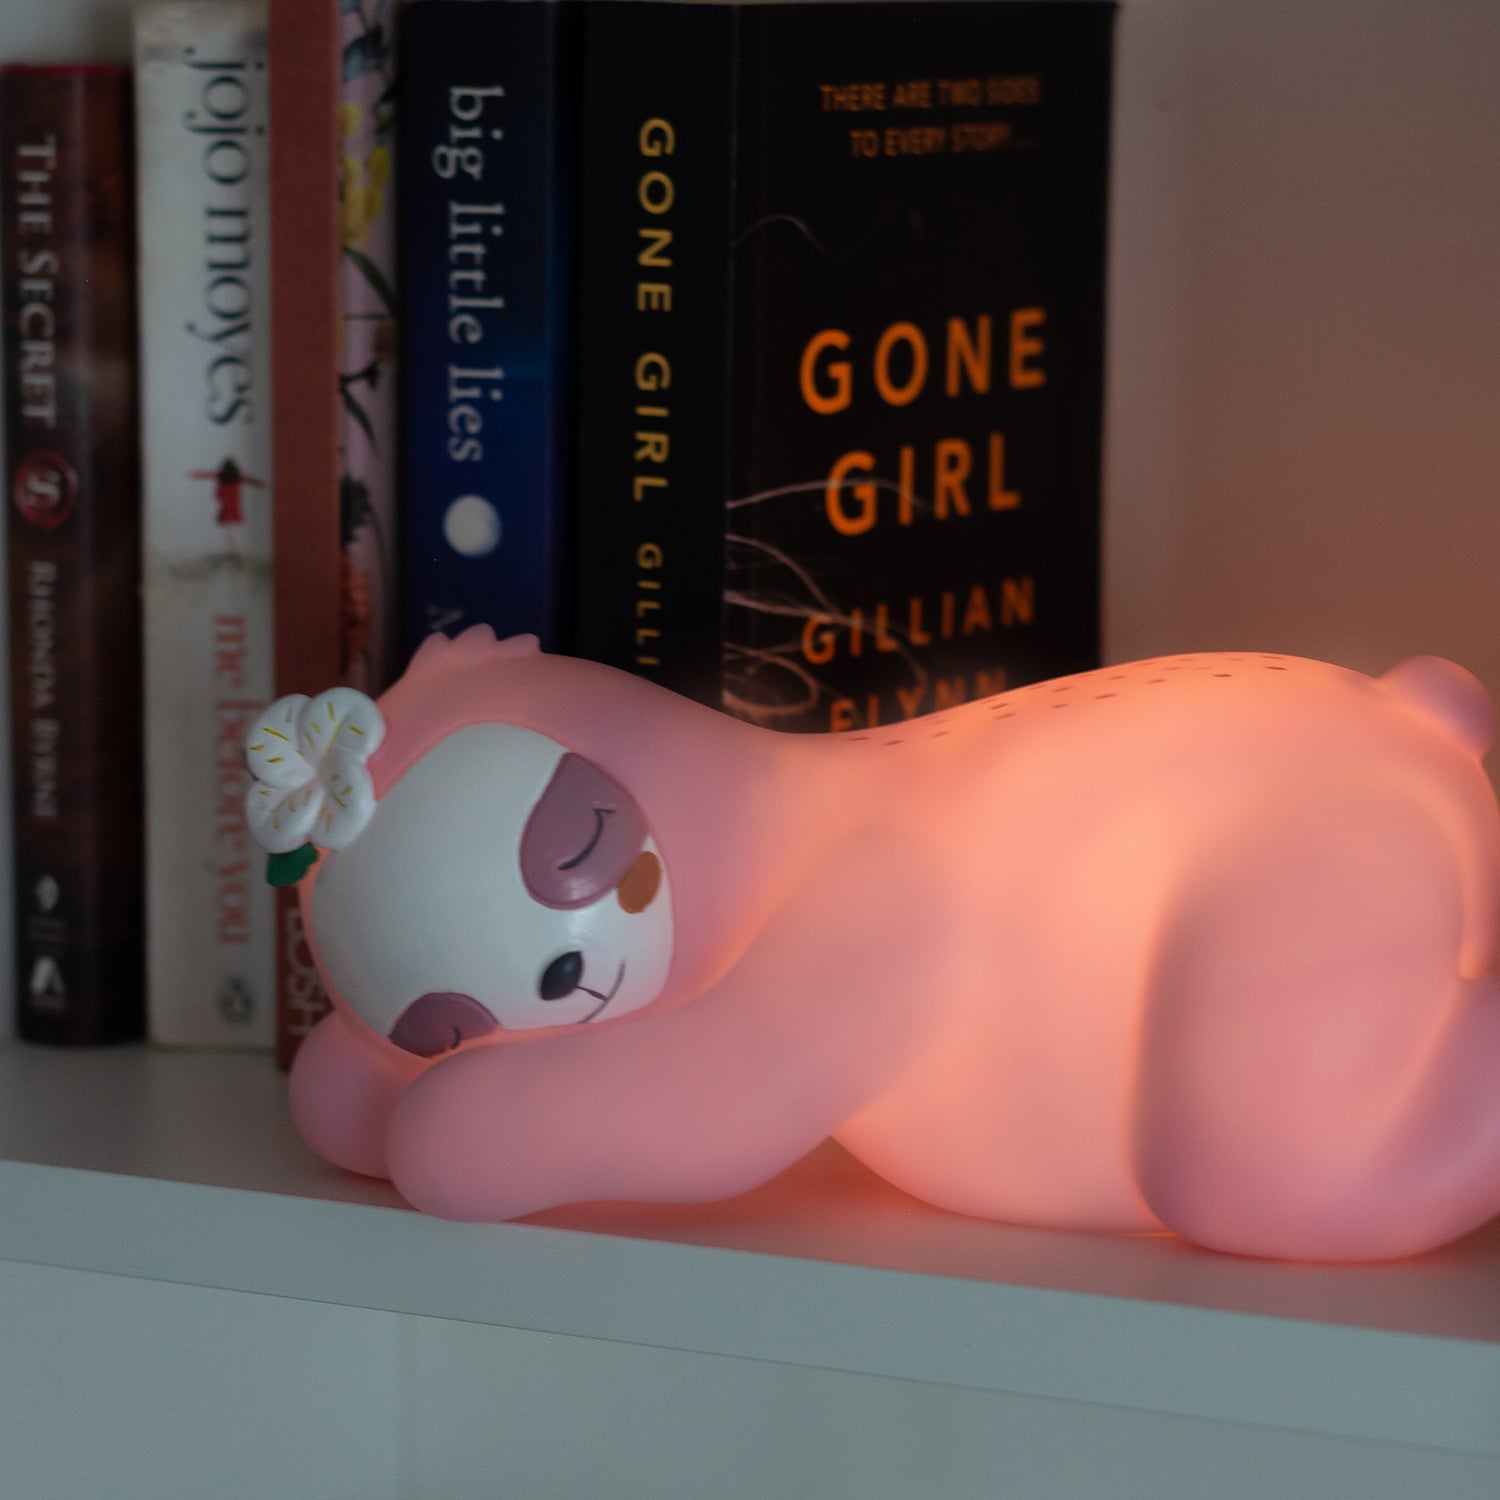 Sleeping sloth-shaped pink night light. These newest Night Lights are set to be an incredible décor addition to any little ones' room and an amazing gift idea for all occasions - birthdays, christenings, holidays, and just because! Boasting a collection of creatures that are sure to both delight and soothe kids of all ages, Night Lights come with custom packaging that features a fun poem and are powered by a USB cord to ensure the Night Light stays bright.